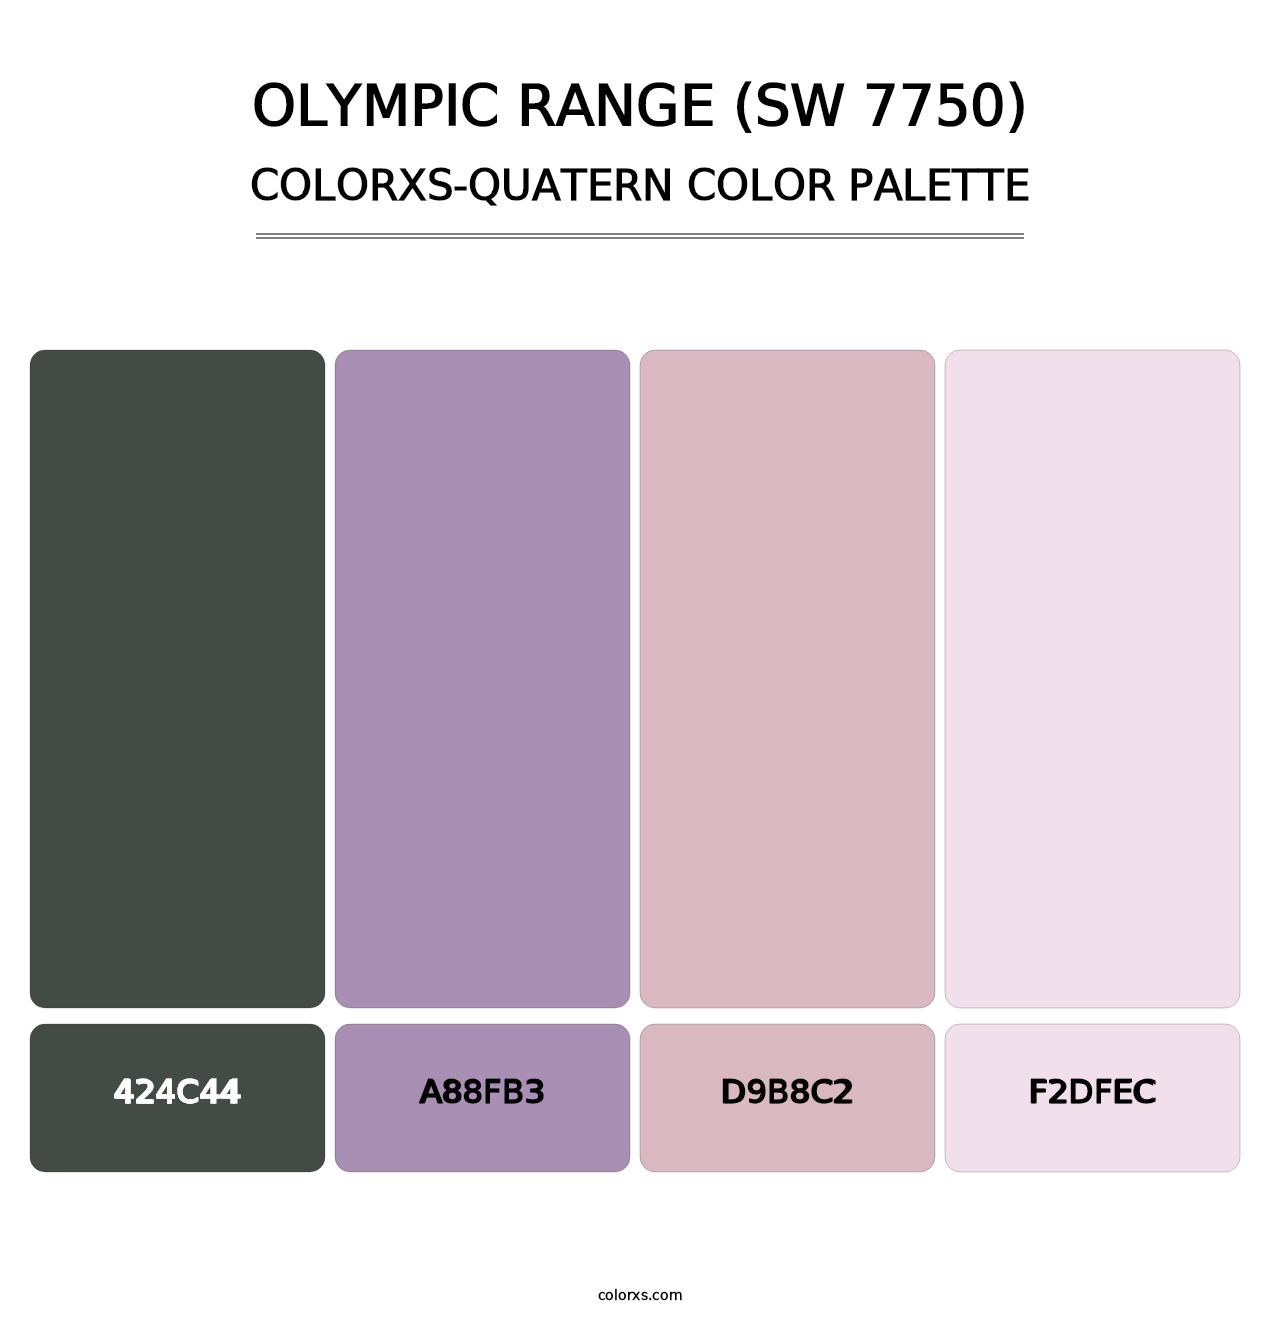 Olympic Range (SW 7750) - Colorxs Quatern Palette